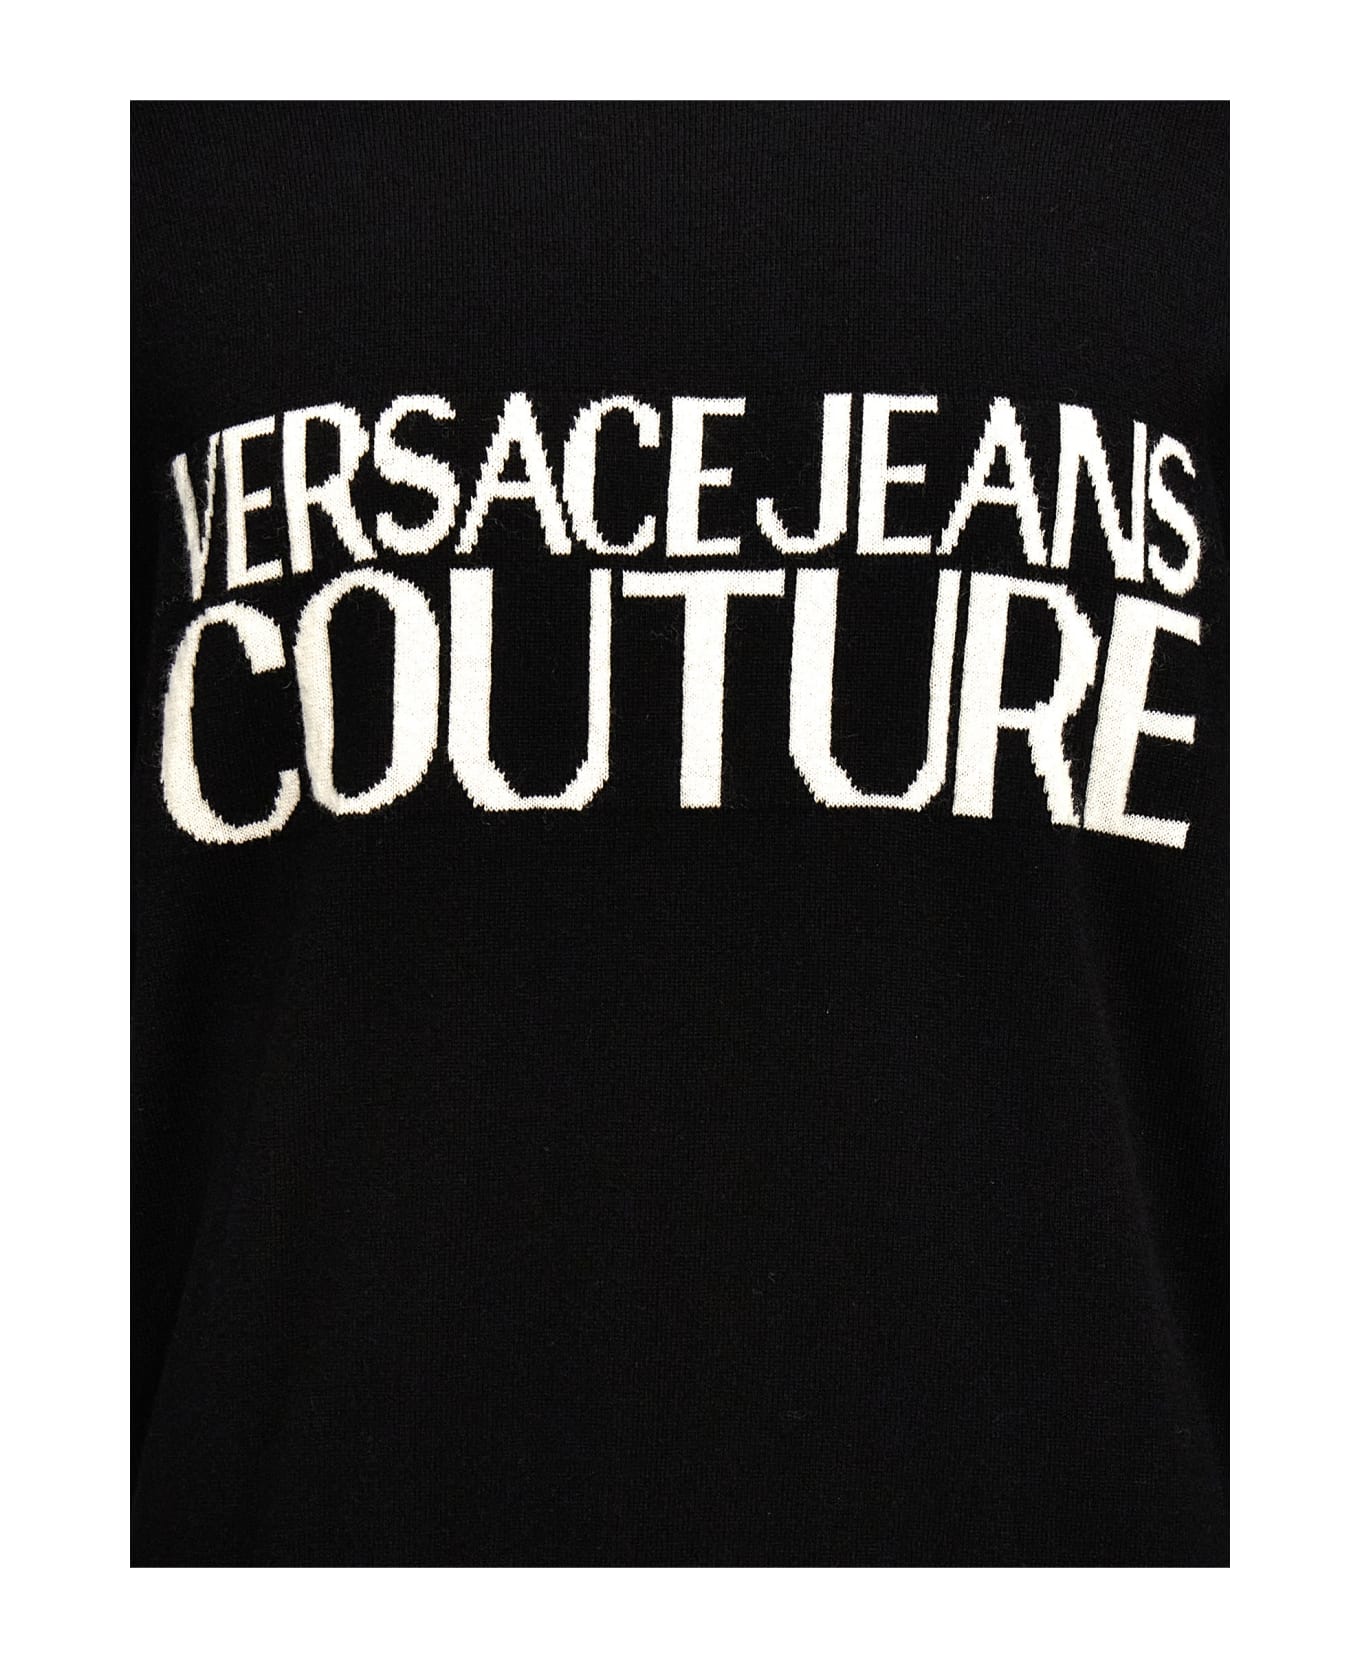 Versace Jeans Couture Logo Intarsia Sweater - White/Black ニットウェア